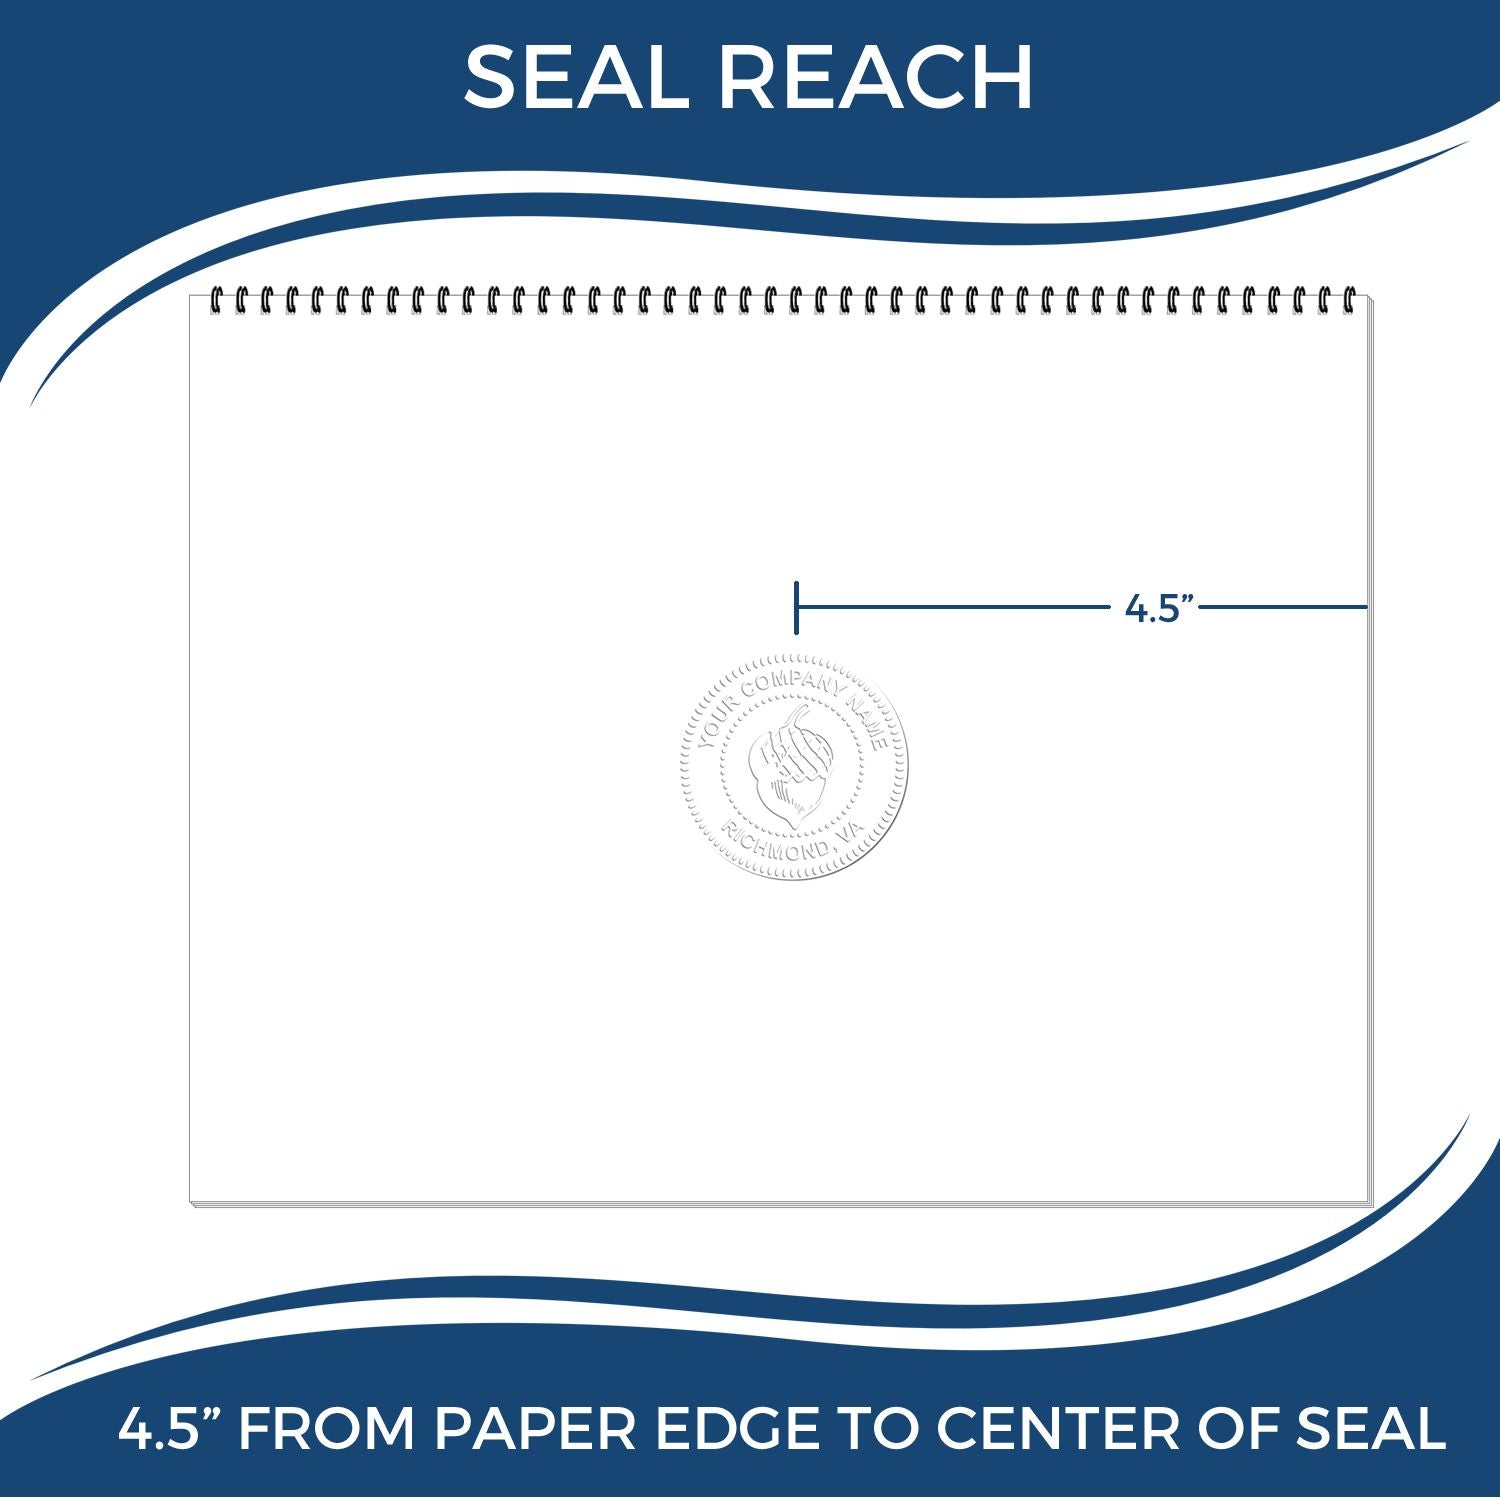 An infographic showing the seal reach which is represented by a ruler and a miniature seal image of the State of New York Extended Long Reach Geologist Seal